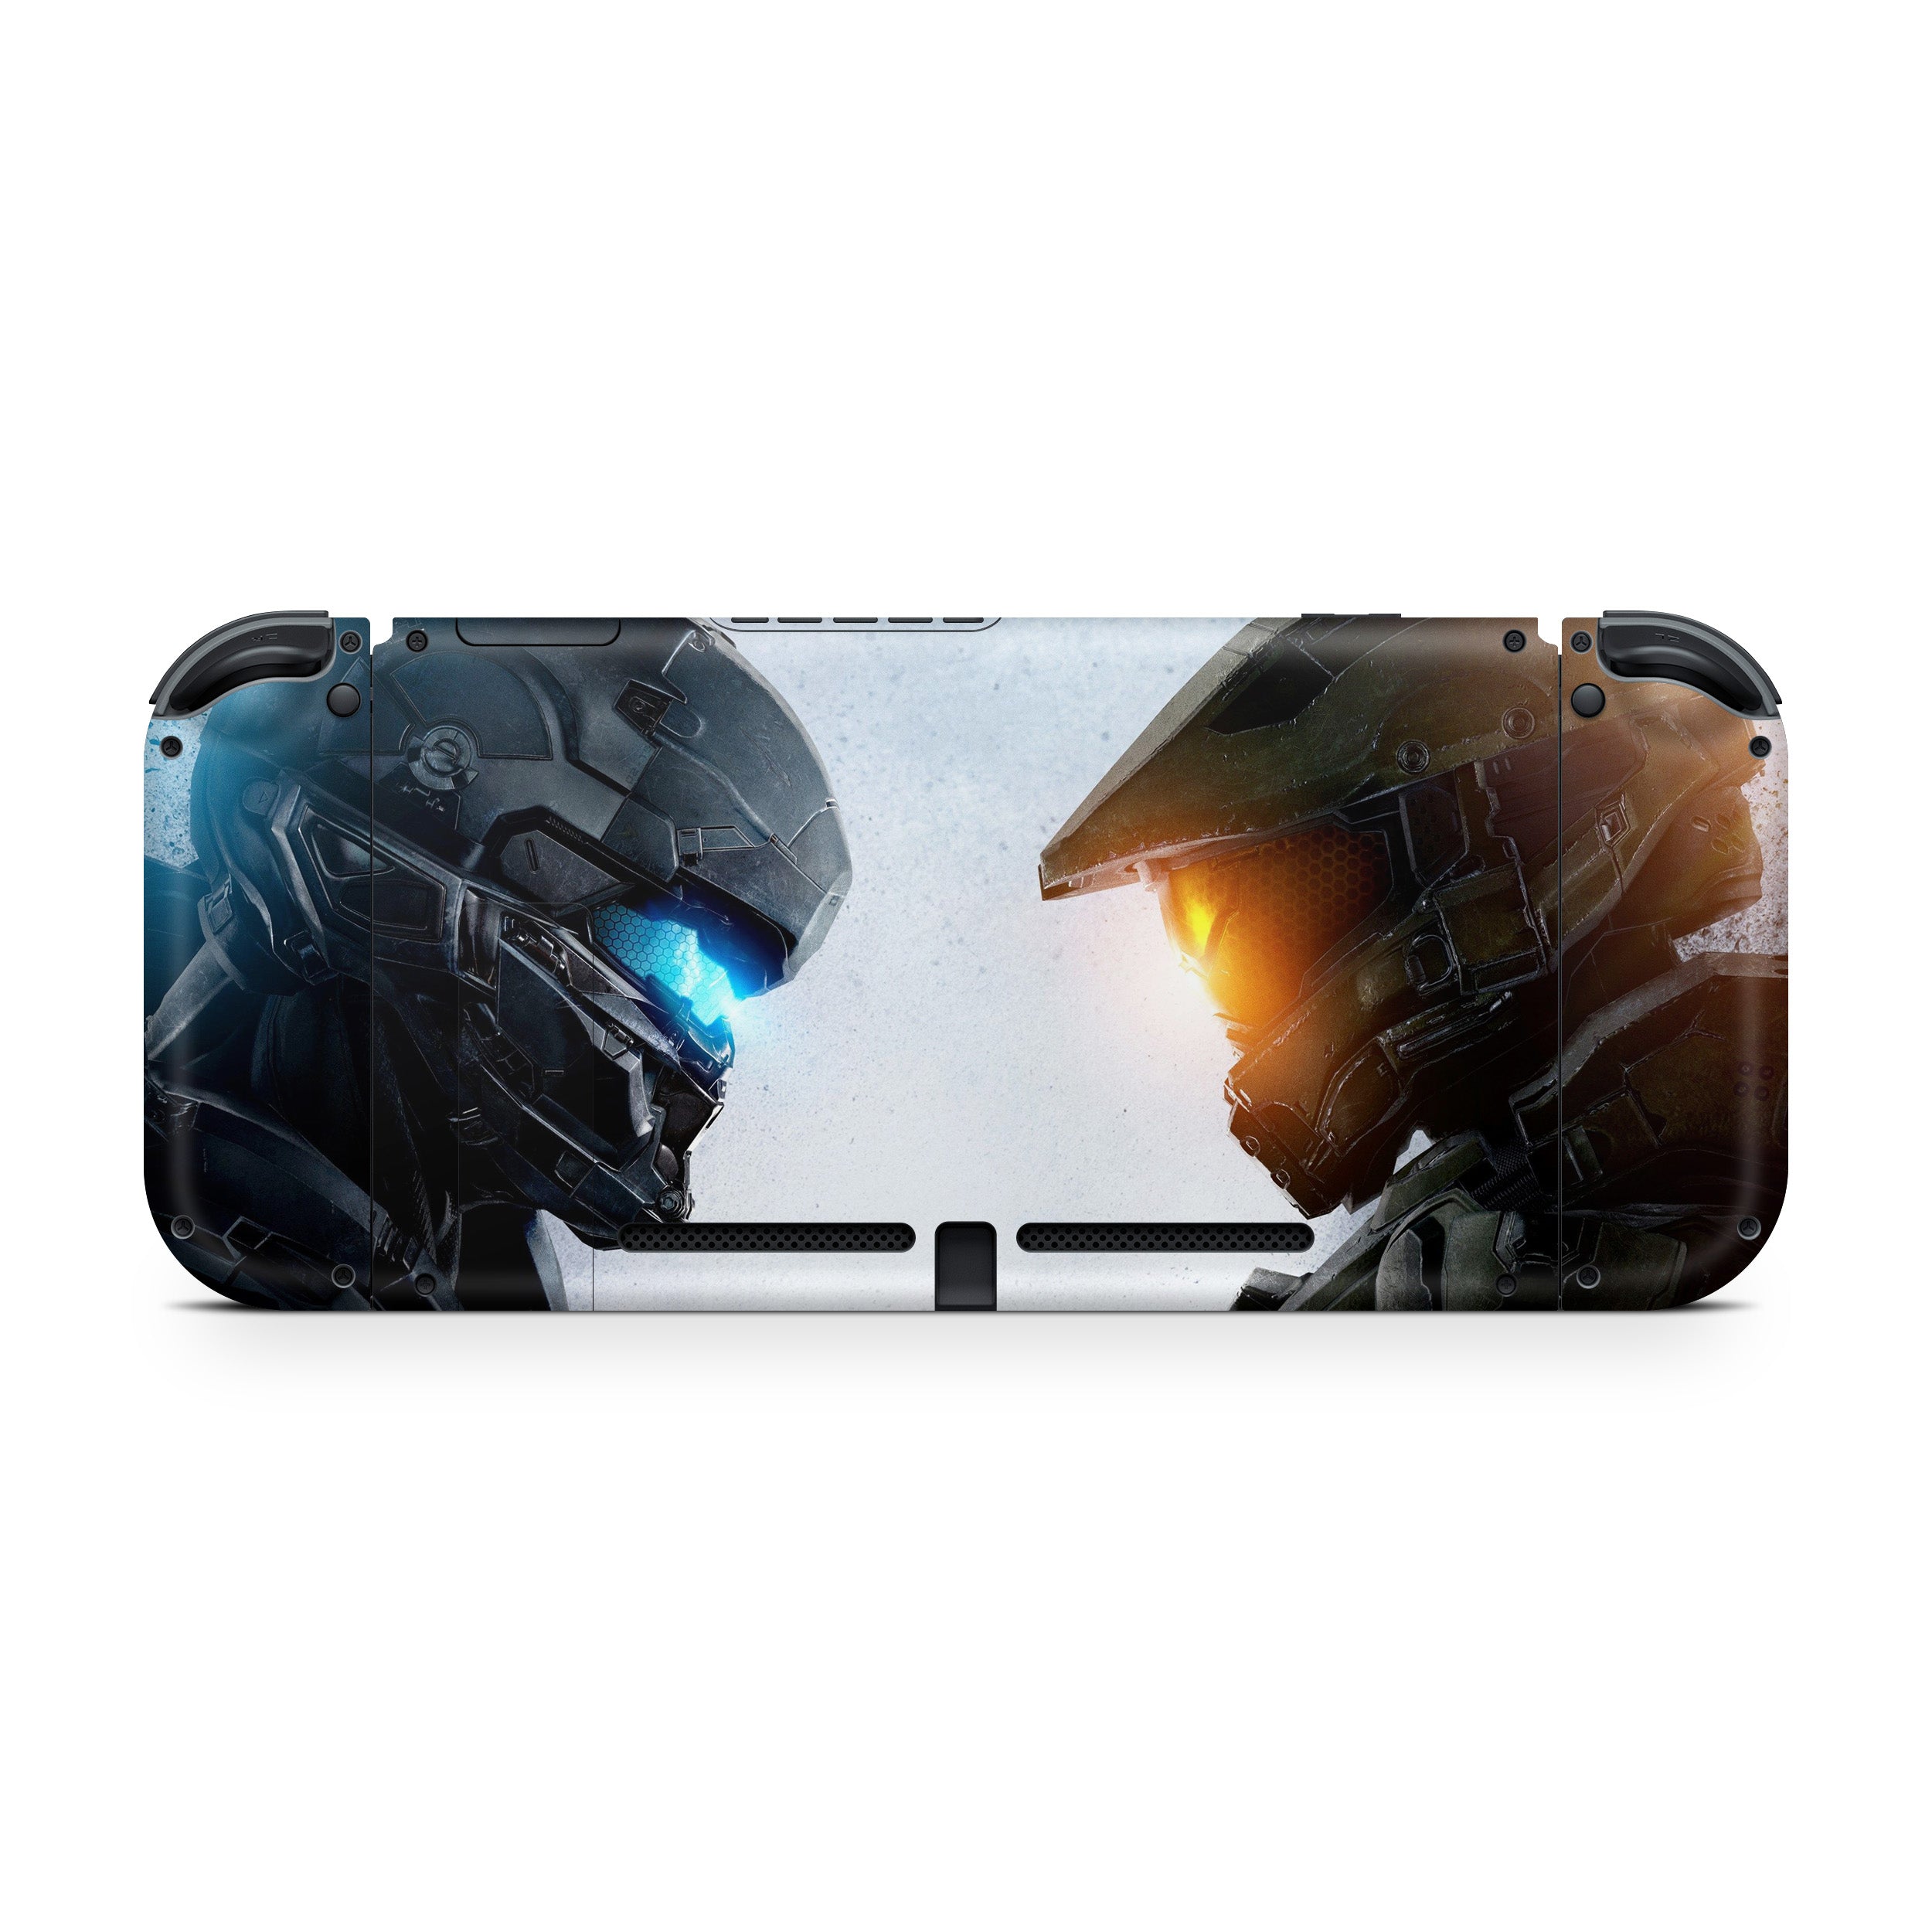 A video game skin featuring a Halo 5 design for the Nintendo Switch.